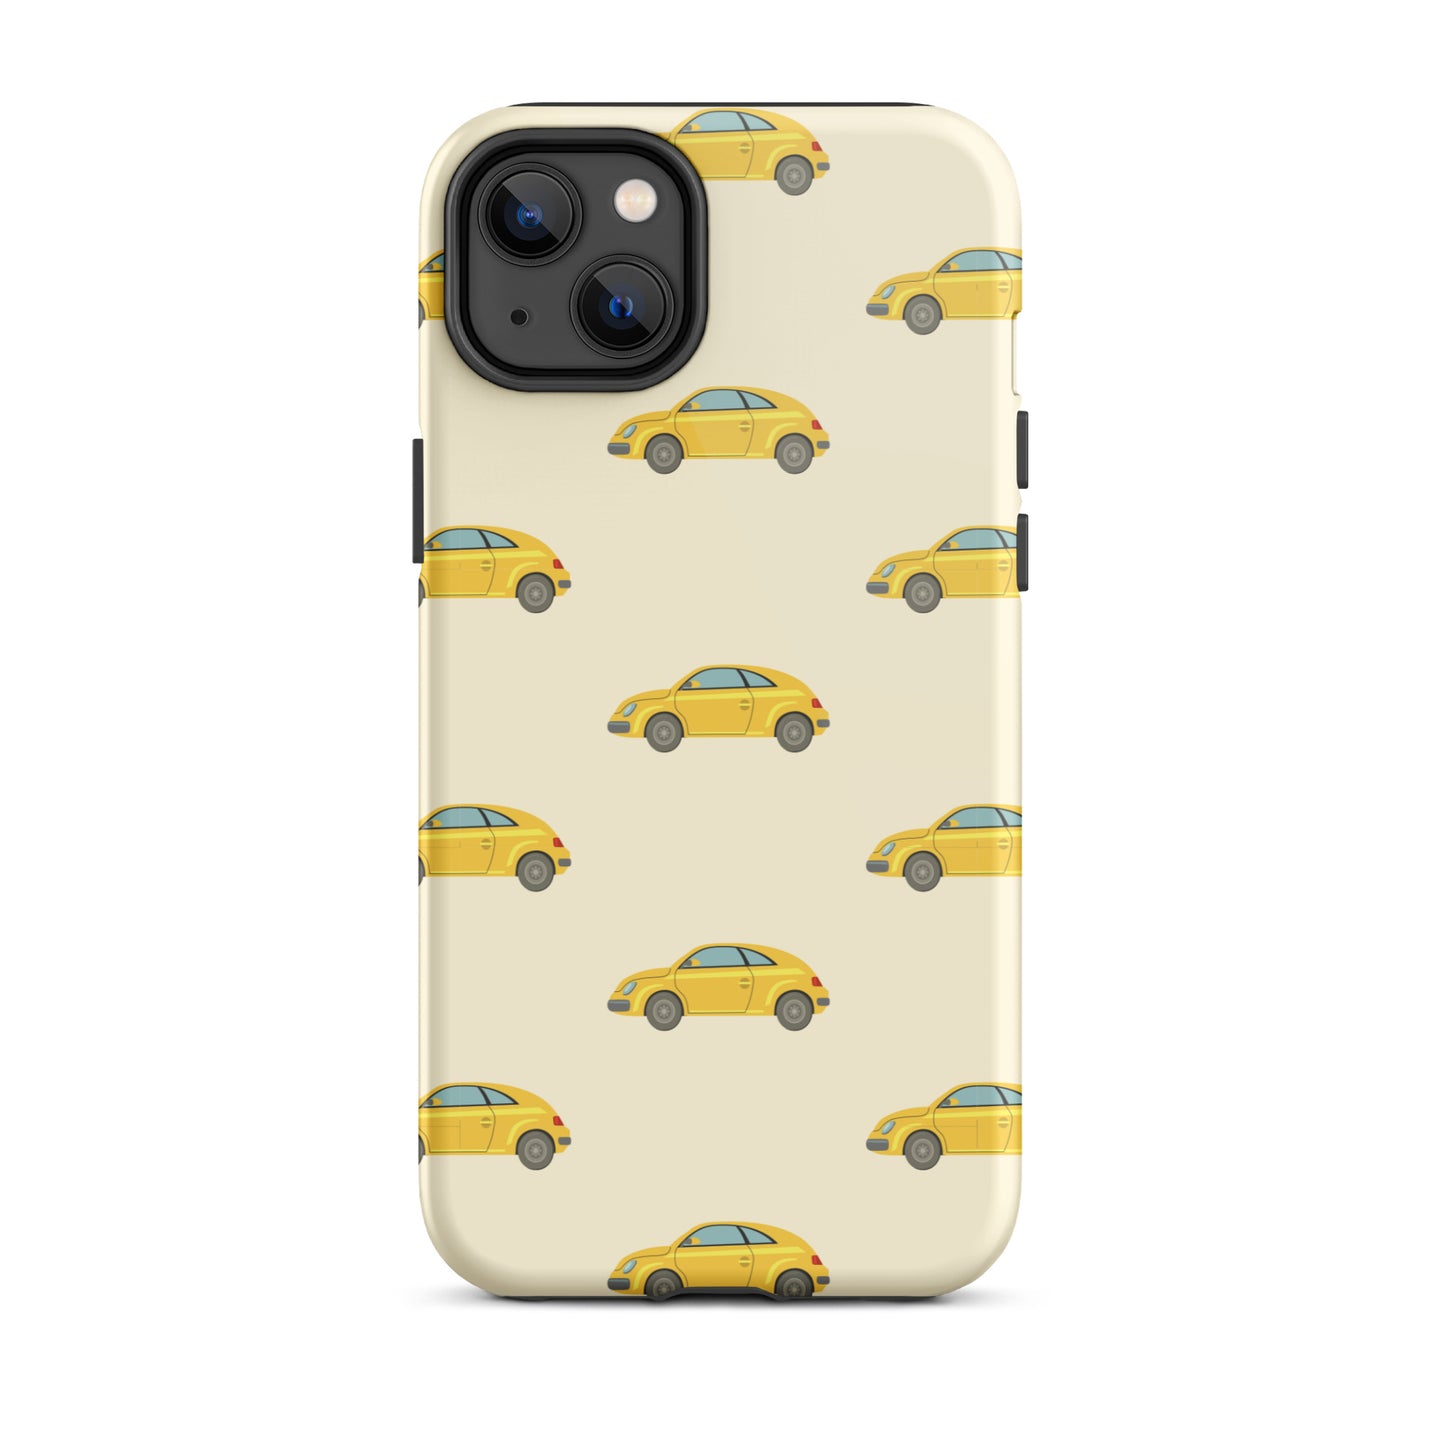 Taxi iPhone case